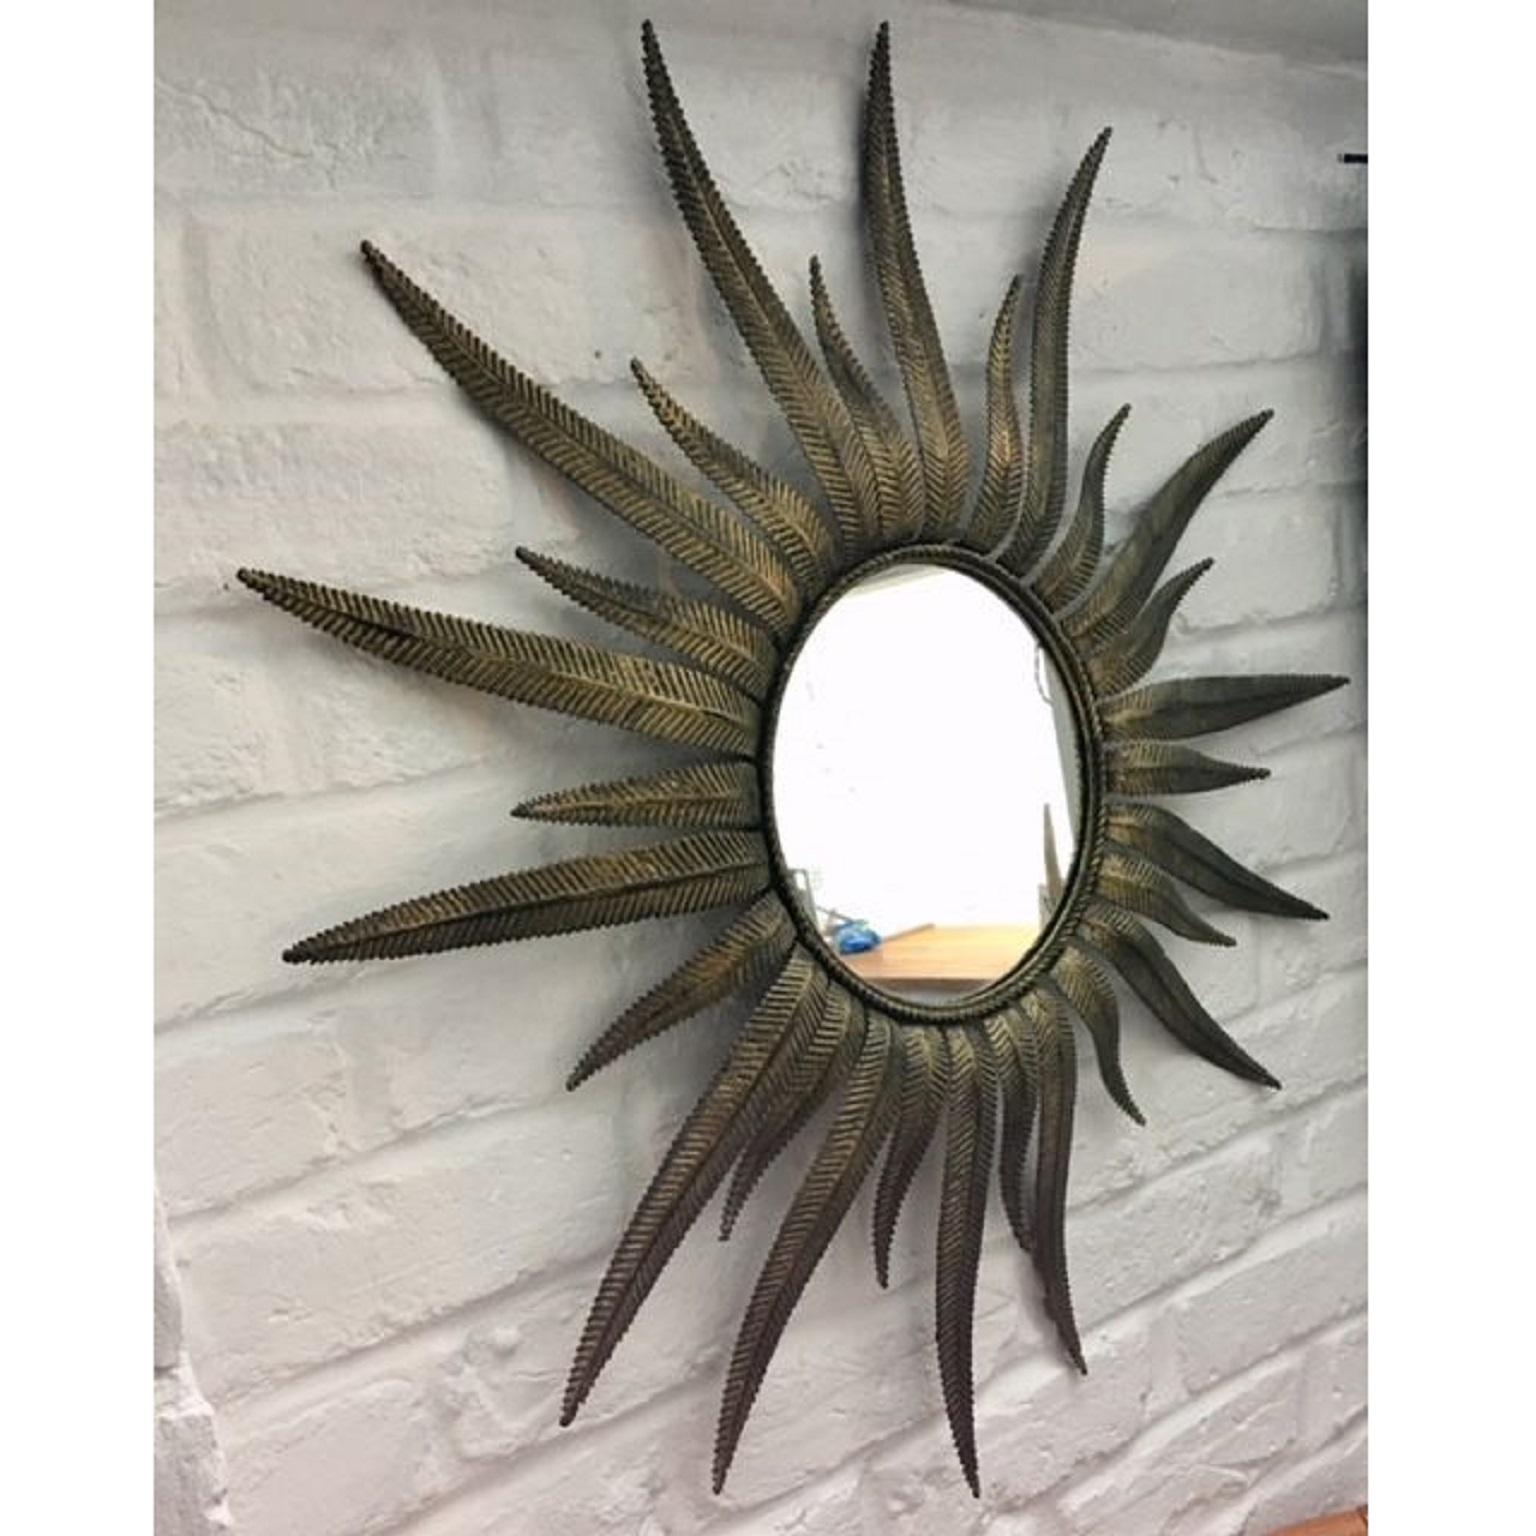 Italian midcentury gilt metal sunburst mirror, 1950s

Stunning midcentury Italian gilt metal sunburst mirror, flanked by differing size palm fronds. A really decorative ‘Hollywood’ style beauty! 

Dimensions: Diameter overall 74 cms (Mirror) 24 cms